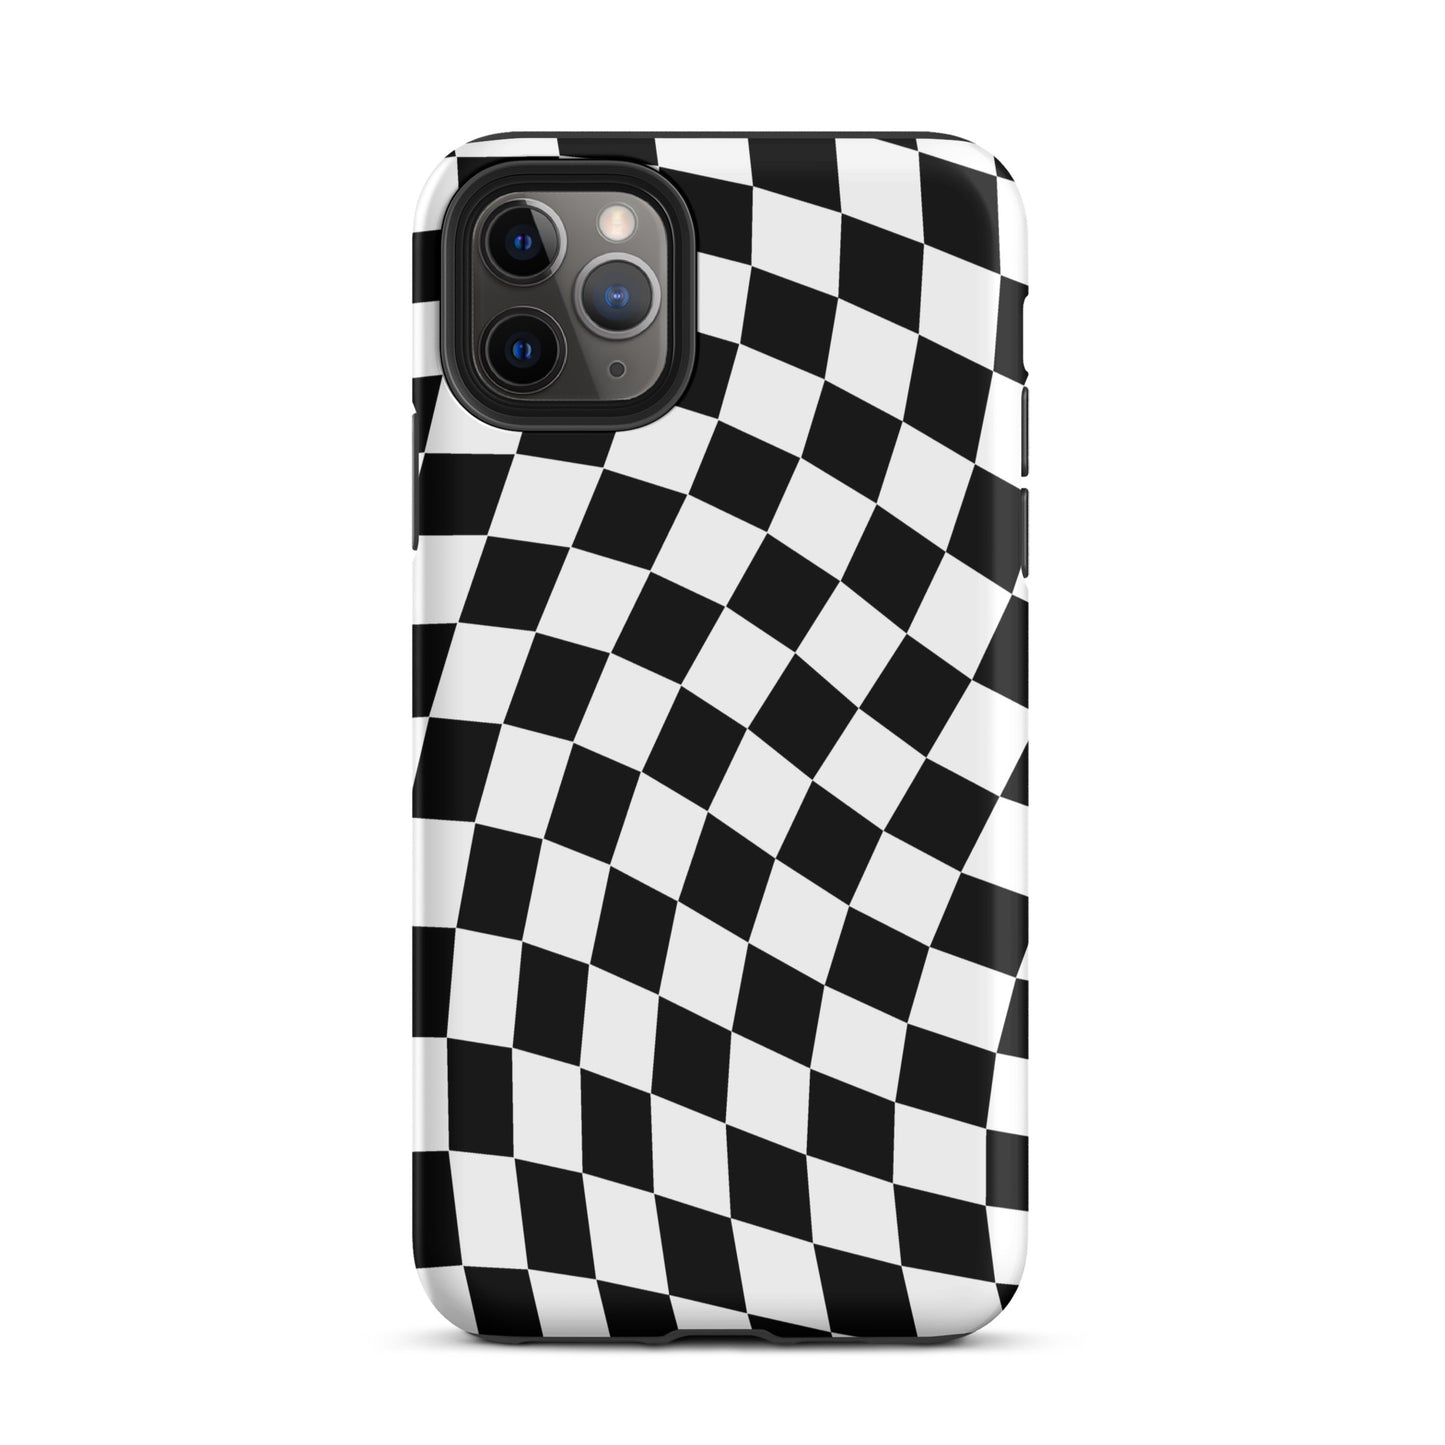 Black Wavy Checkered iPhone Case iPhone 11 Pro Max Matte